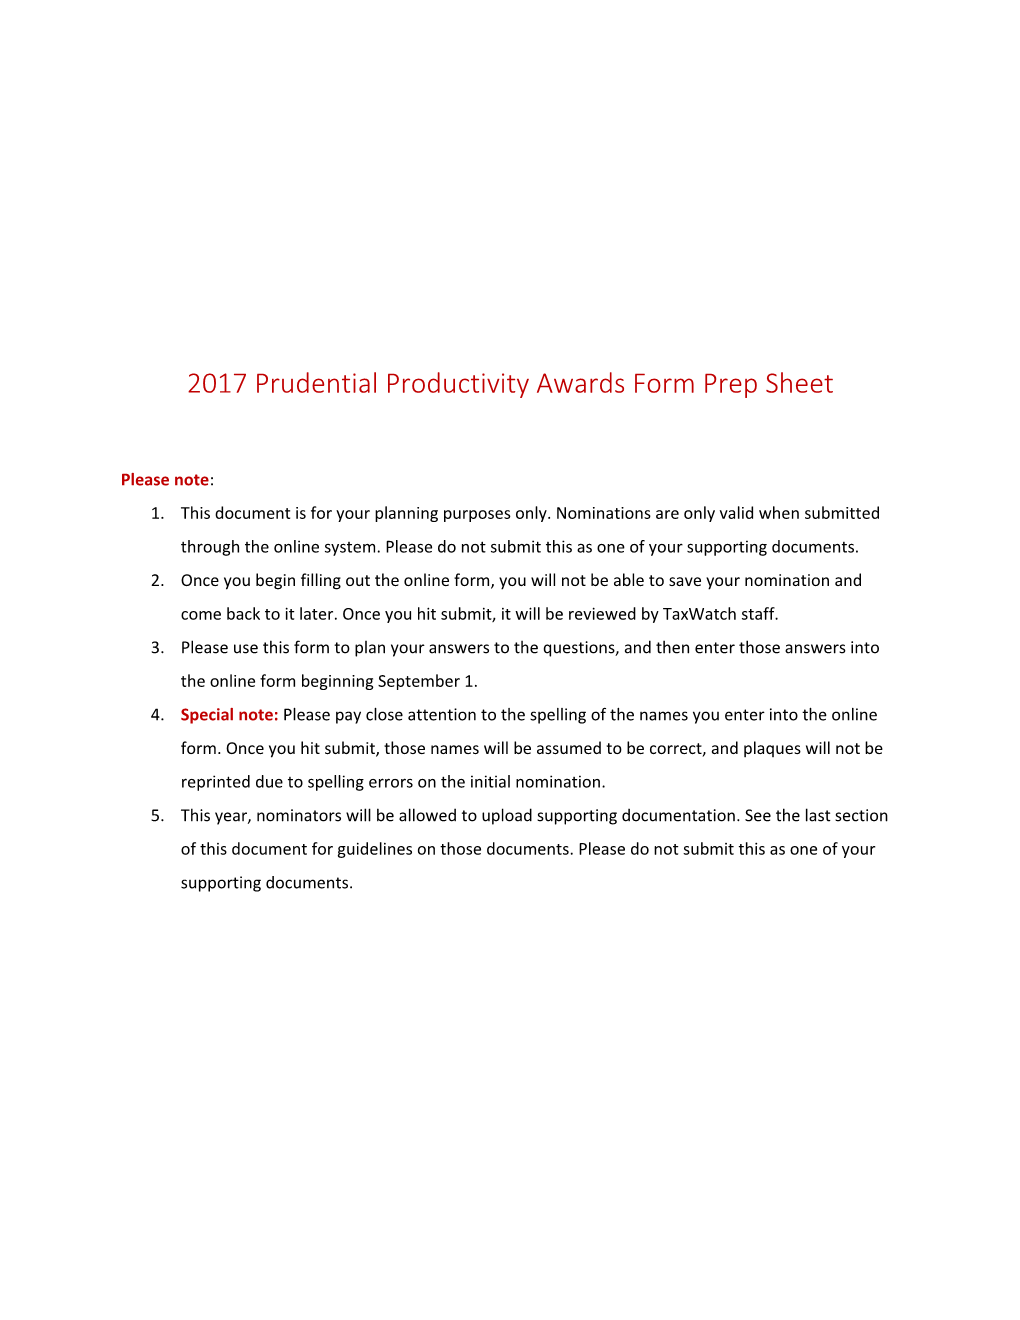 2017 Prudential Productivity Awards Form Prep Sheet